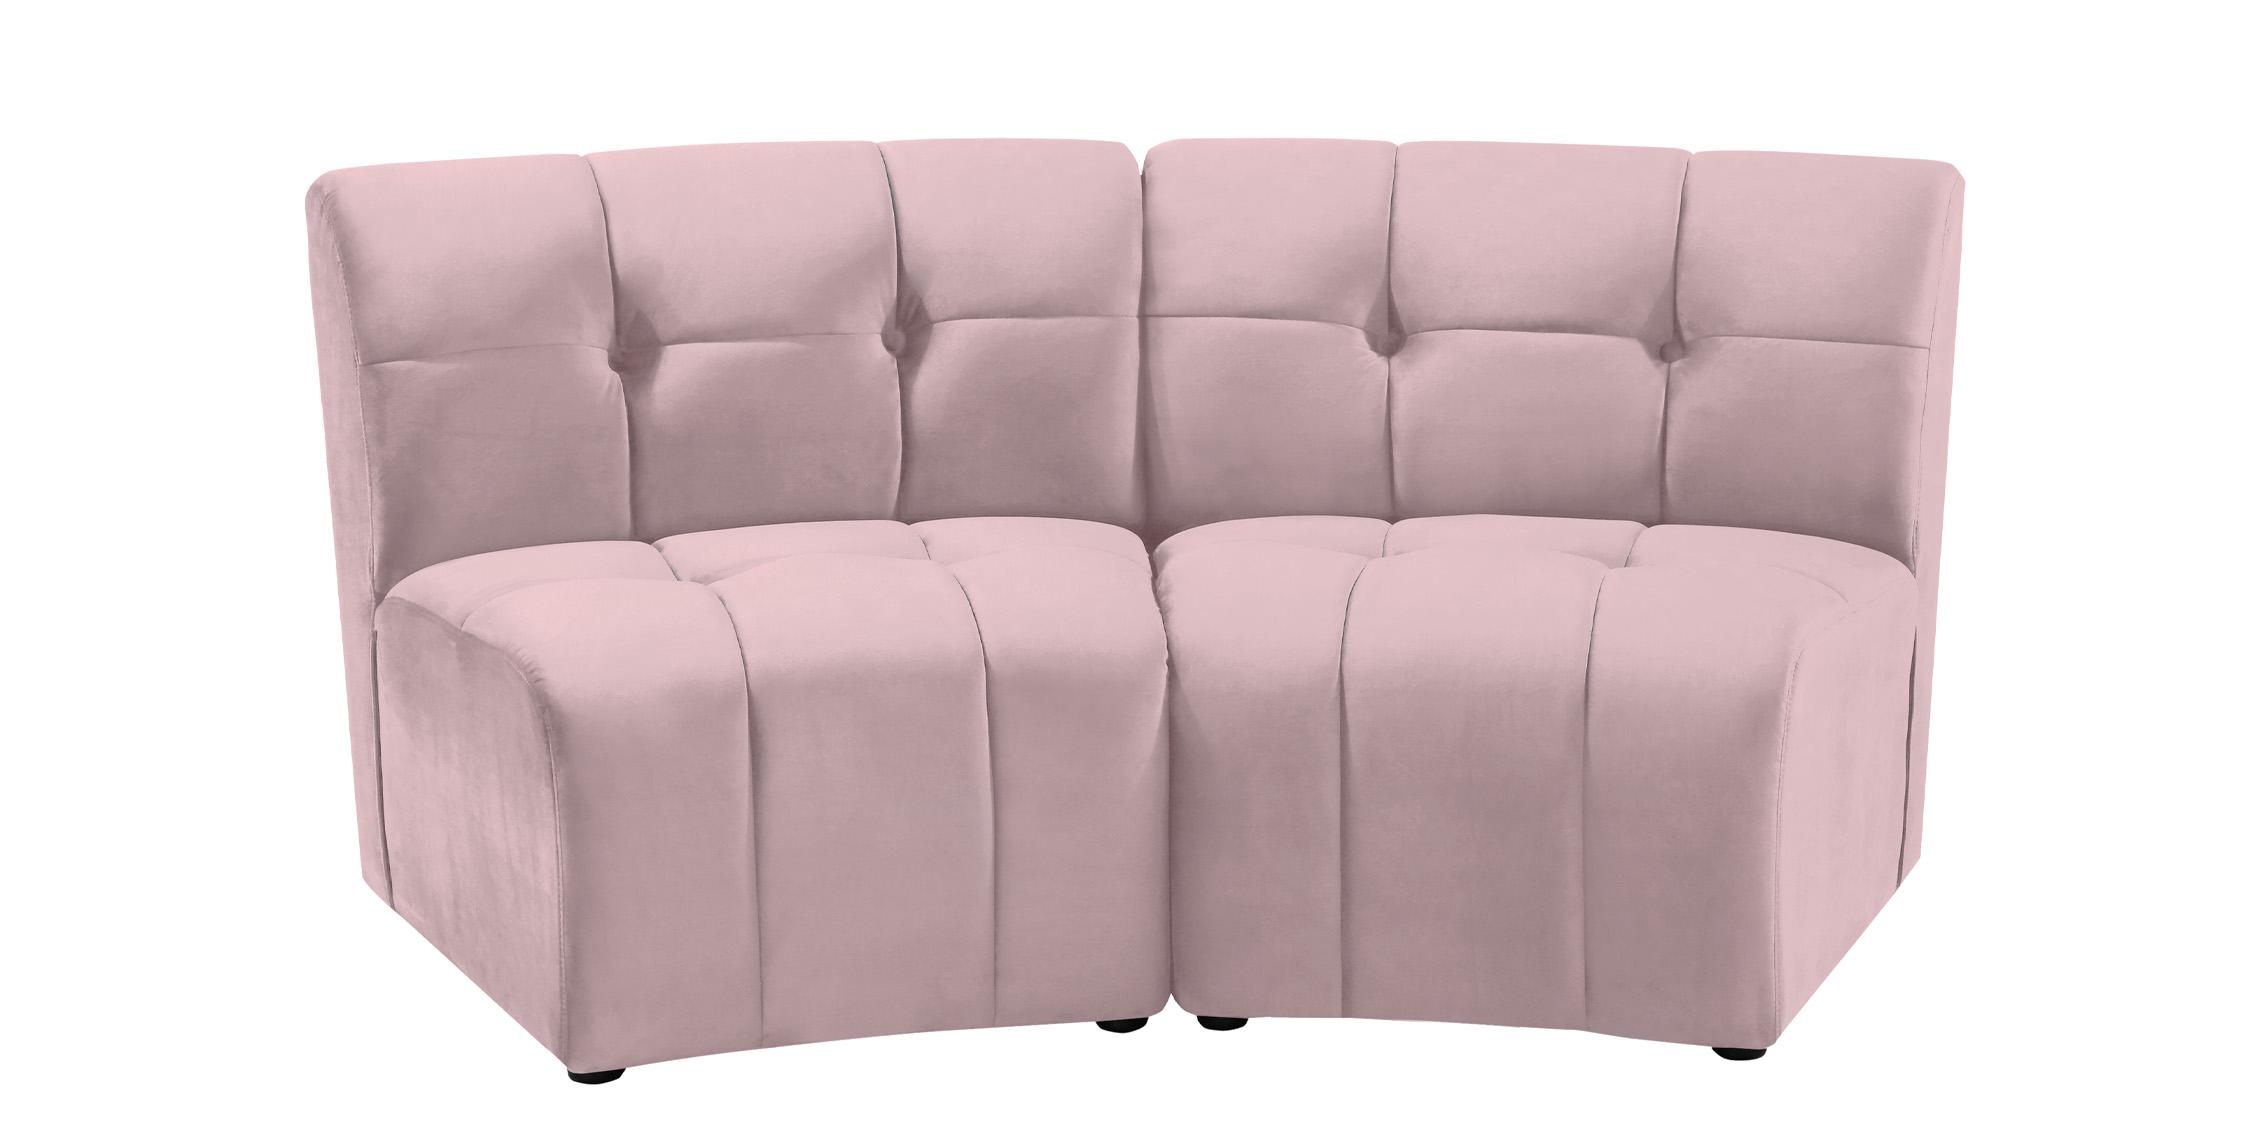 Contemporary, Modern Modular Sectional Sofa LIMITLESS 645Pink-2PC 645Pink-2PC in Pink Velvet